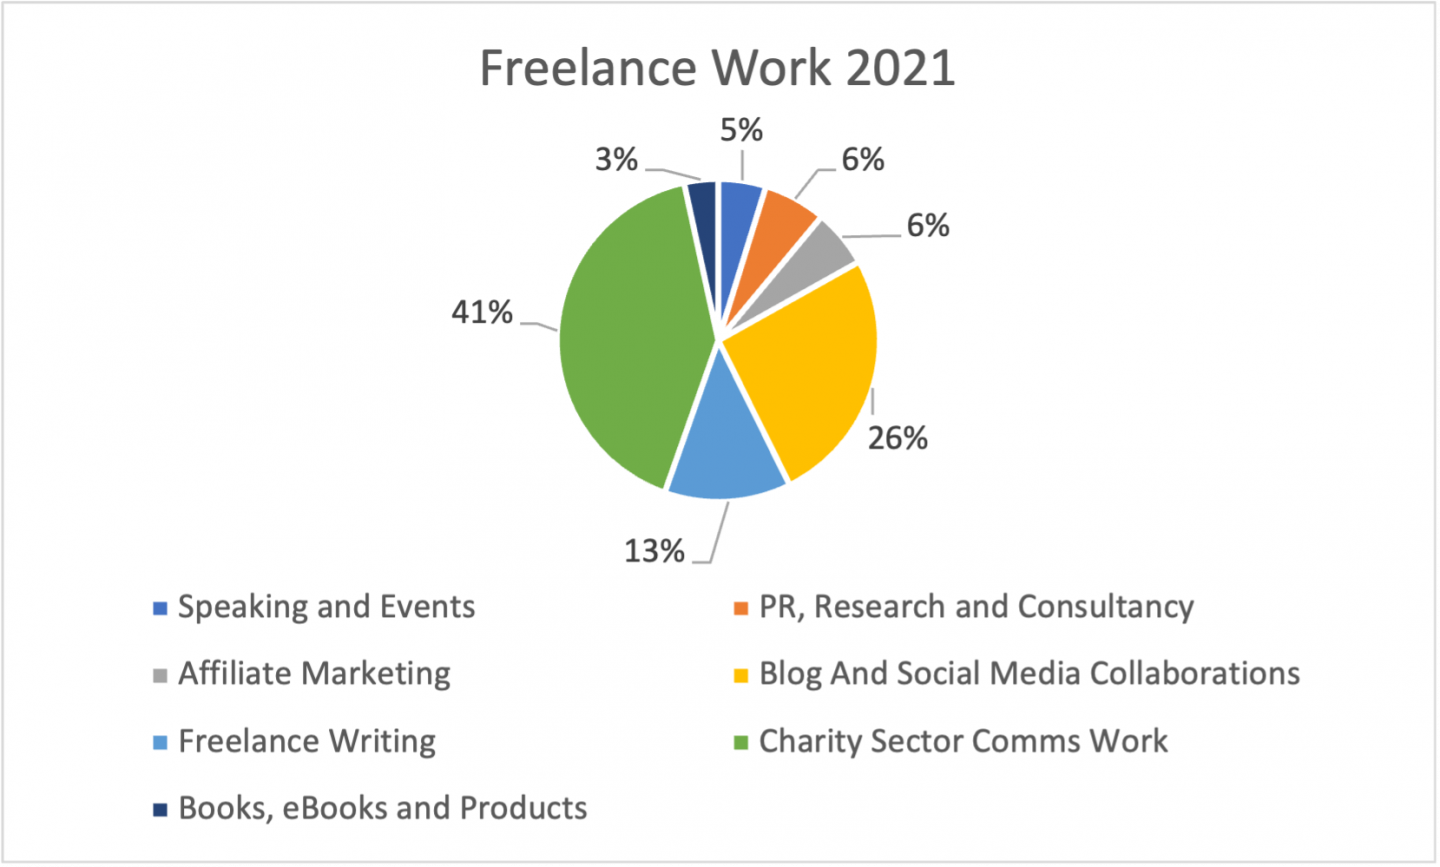 pie chart showing freelance income streams for 2021. these are charity sector work (41%), blog and social media collaborations (26%), freelance writing (13%), affiliate marketing (6%), PR and consultancy (6%), speaking and events (5%), and books, ebooks and products (3%)